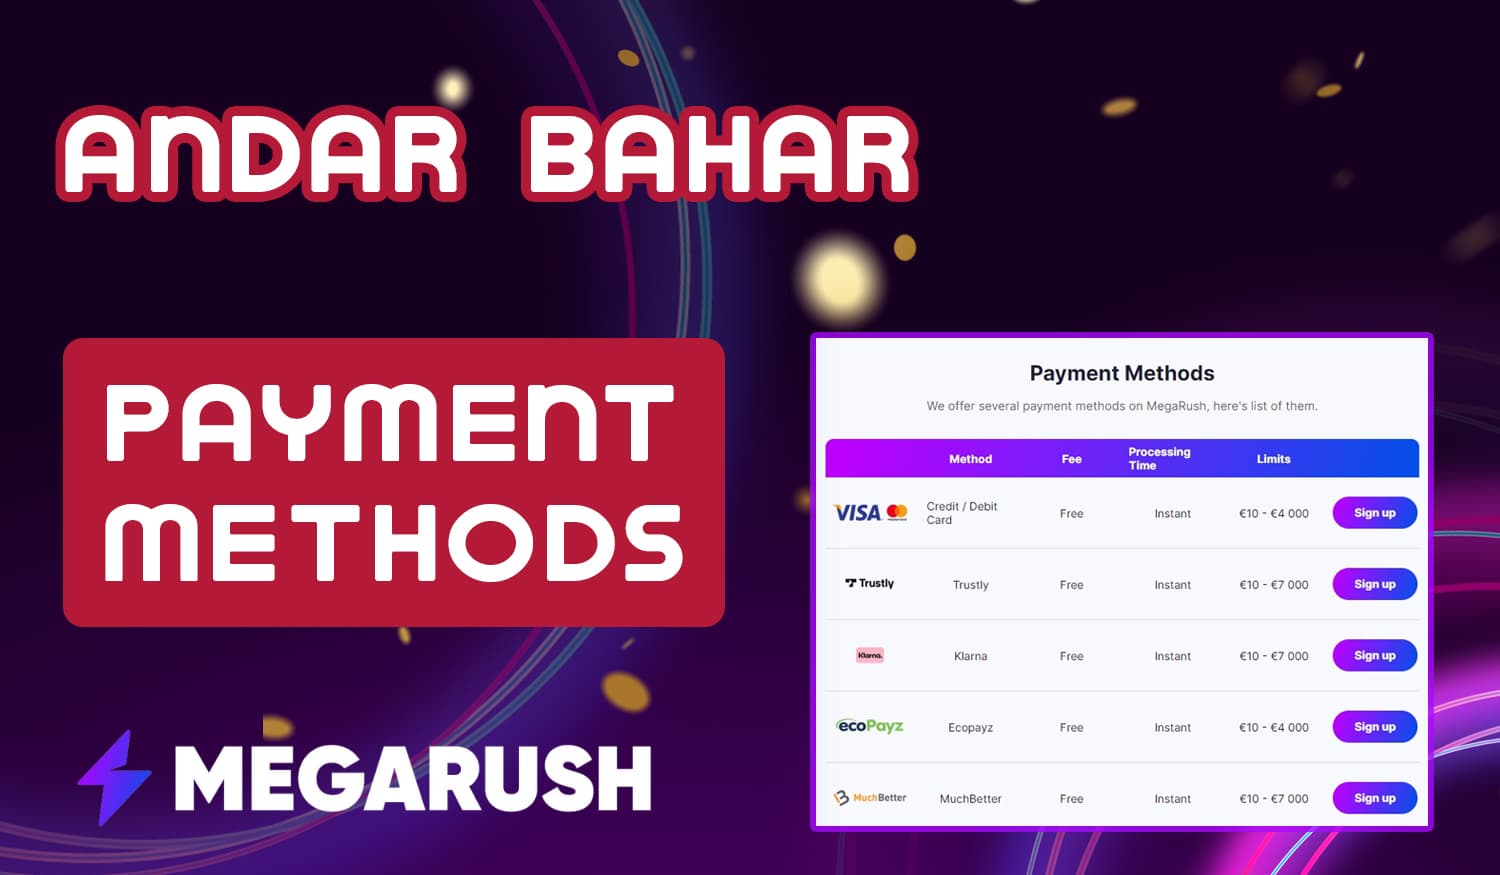 Table with payment methods and amounts for deposits and withdrawals from Megarush